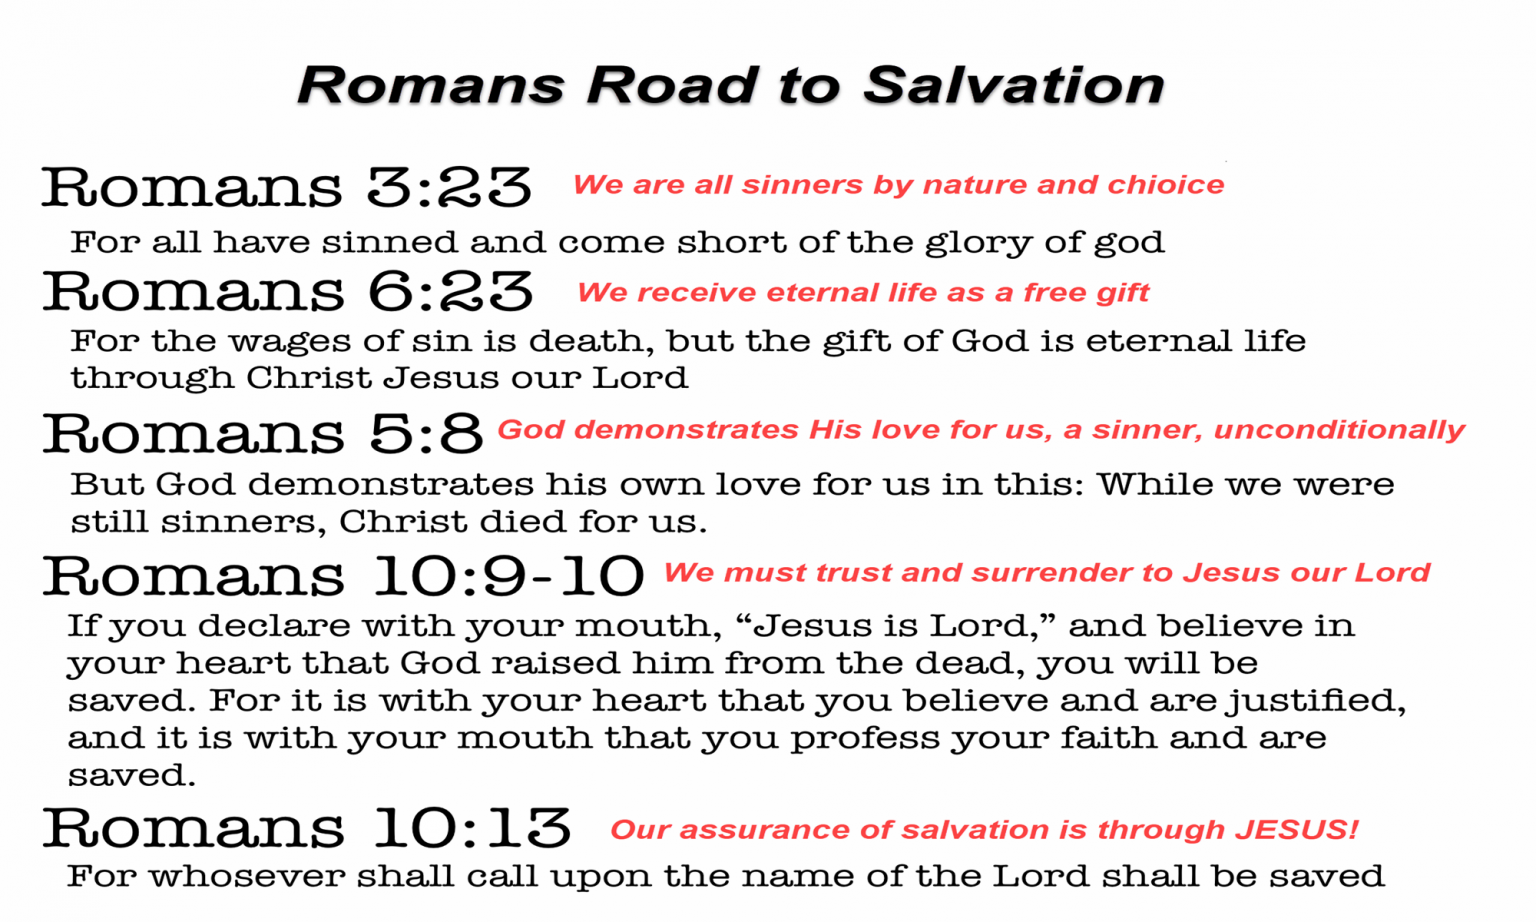 share-romans-road-romans-road-to-salvation